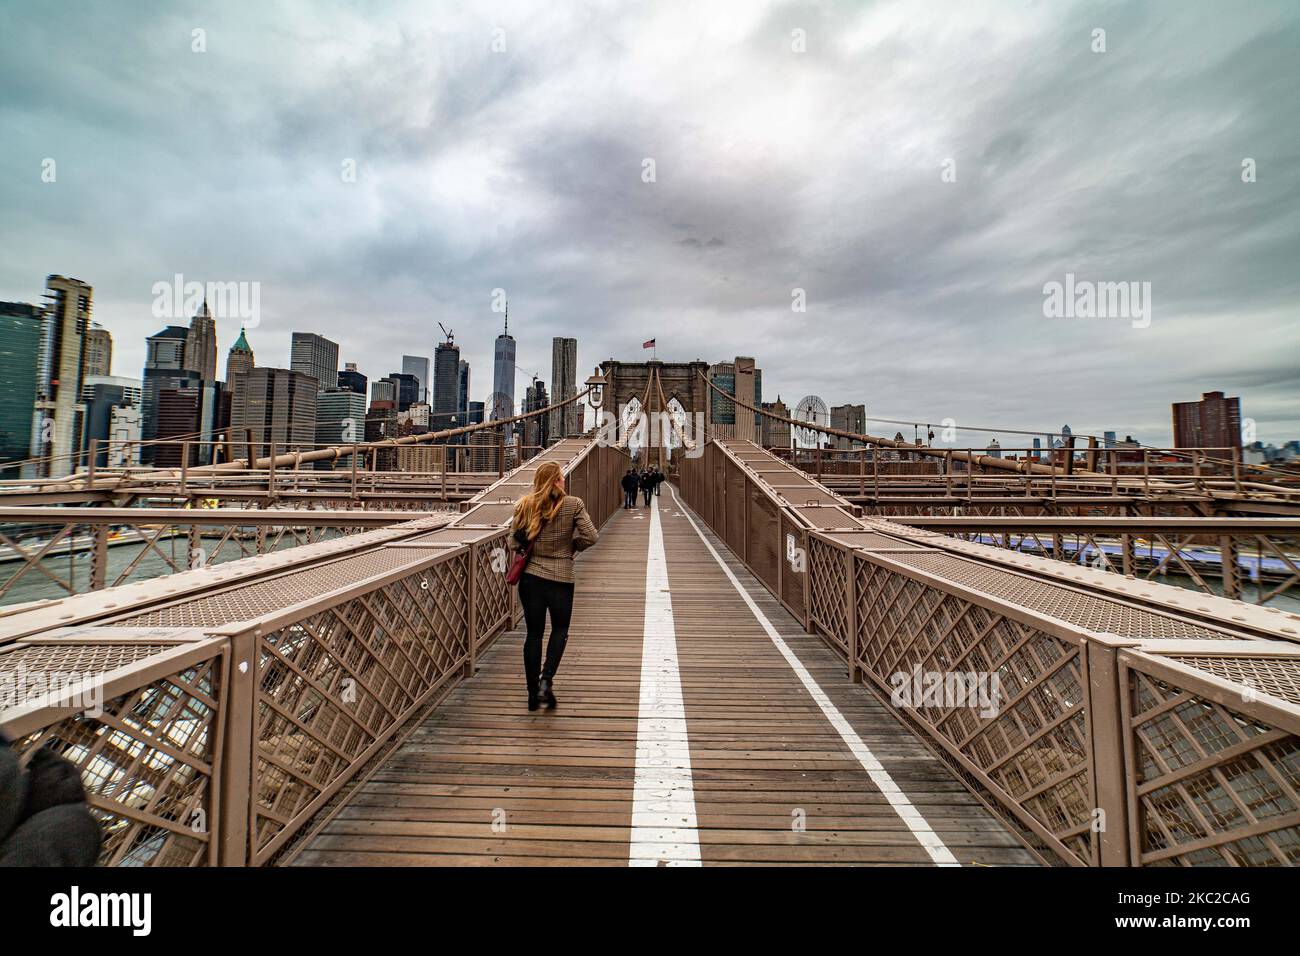 View from the Brooklyn Bridge of Downtown Manhattan. The Brooklyn Bridge in New York City in the United States as seen during a cloudy day with tourists and locals on it. The famous bridge, a landmark for NYC and the United States of America is a hybrid cable stayed suspension bridge spanning the East River between the boroughs of Manhattan and Brooklyn. The historical NY landmark bridge was built between 1869 and 1883. New York, USA on February 13, 2020 (Photo by Nicolas Economou/NurPhoto) Stock Photo